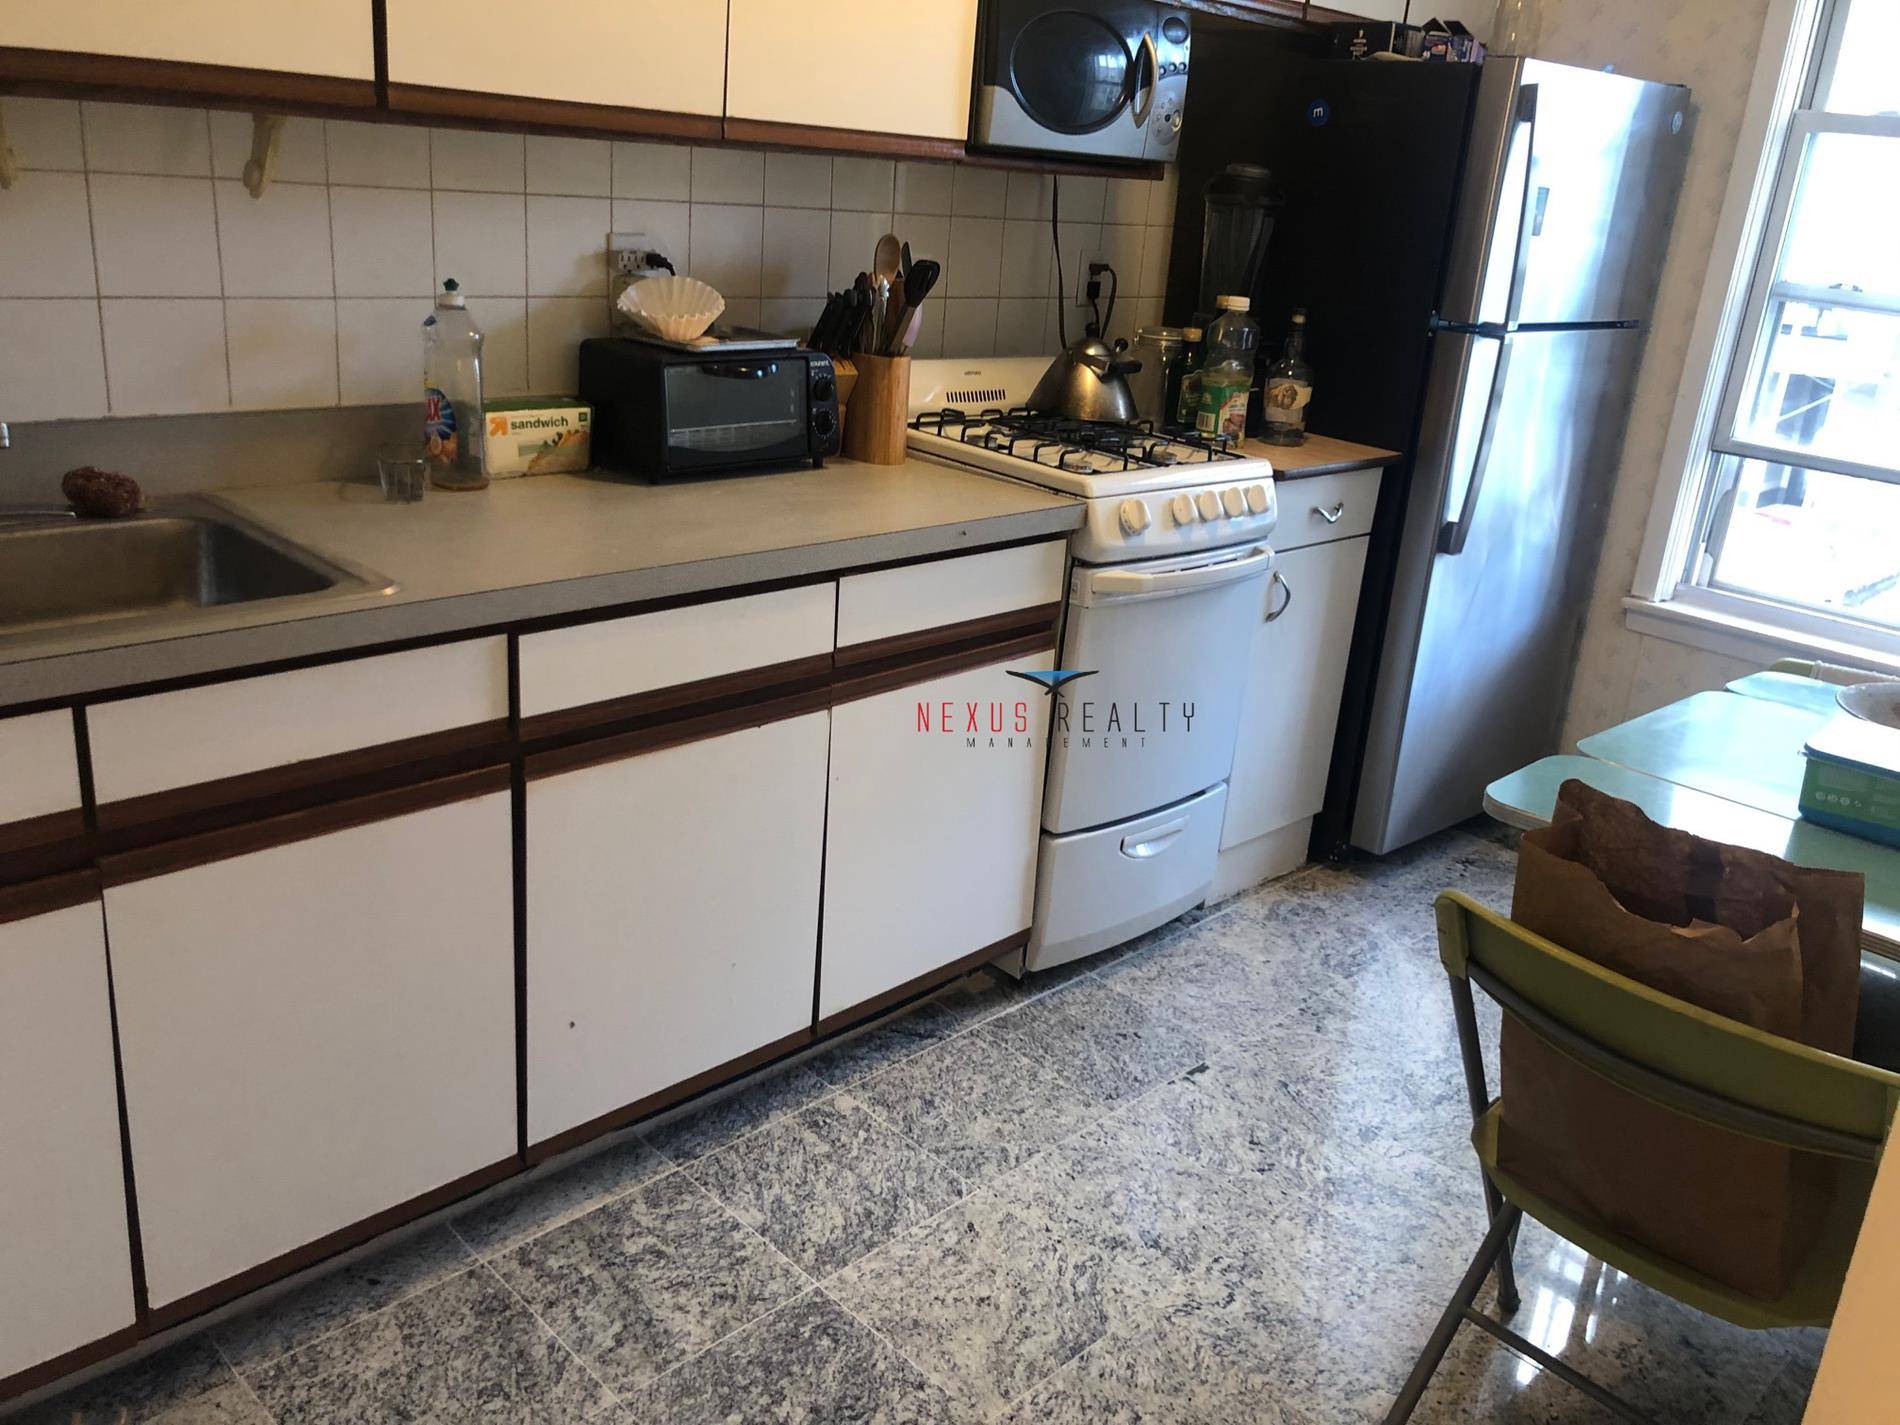 Great 3 Bedroom apartment in the heart of Astoria ONLY 27001 King size bedroom, 1 queen size bedroom and 1 full size bedroom on the 2nd floor of a 2 ...